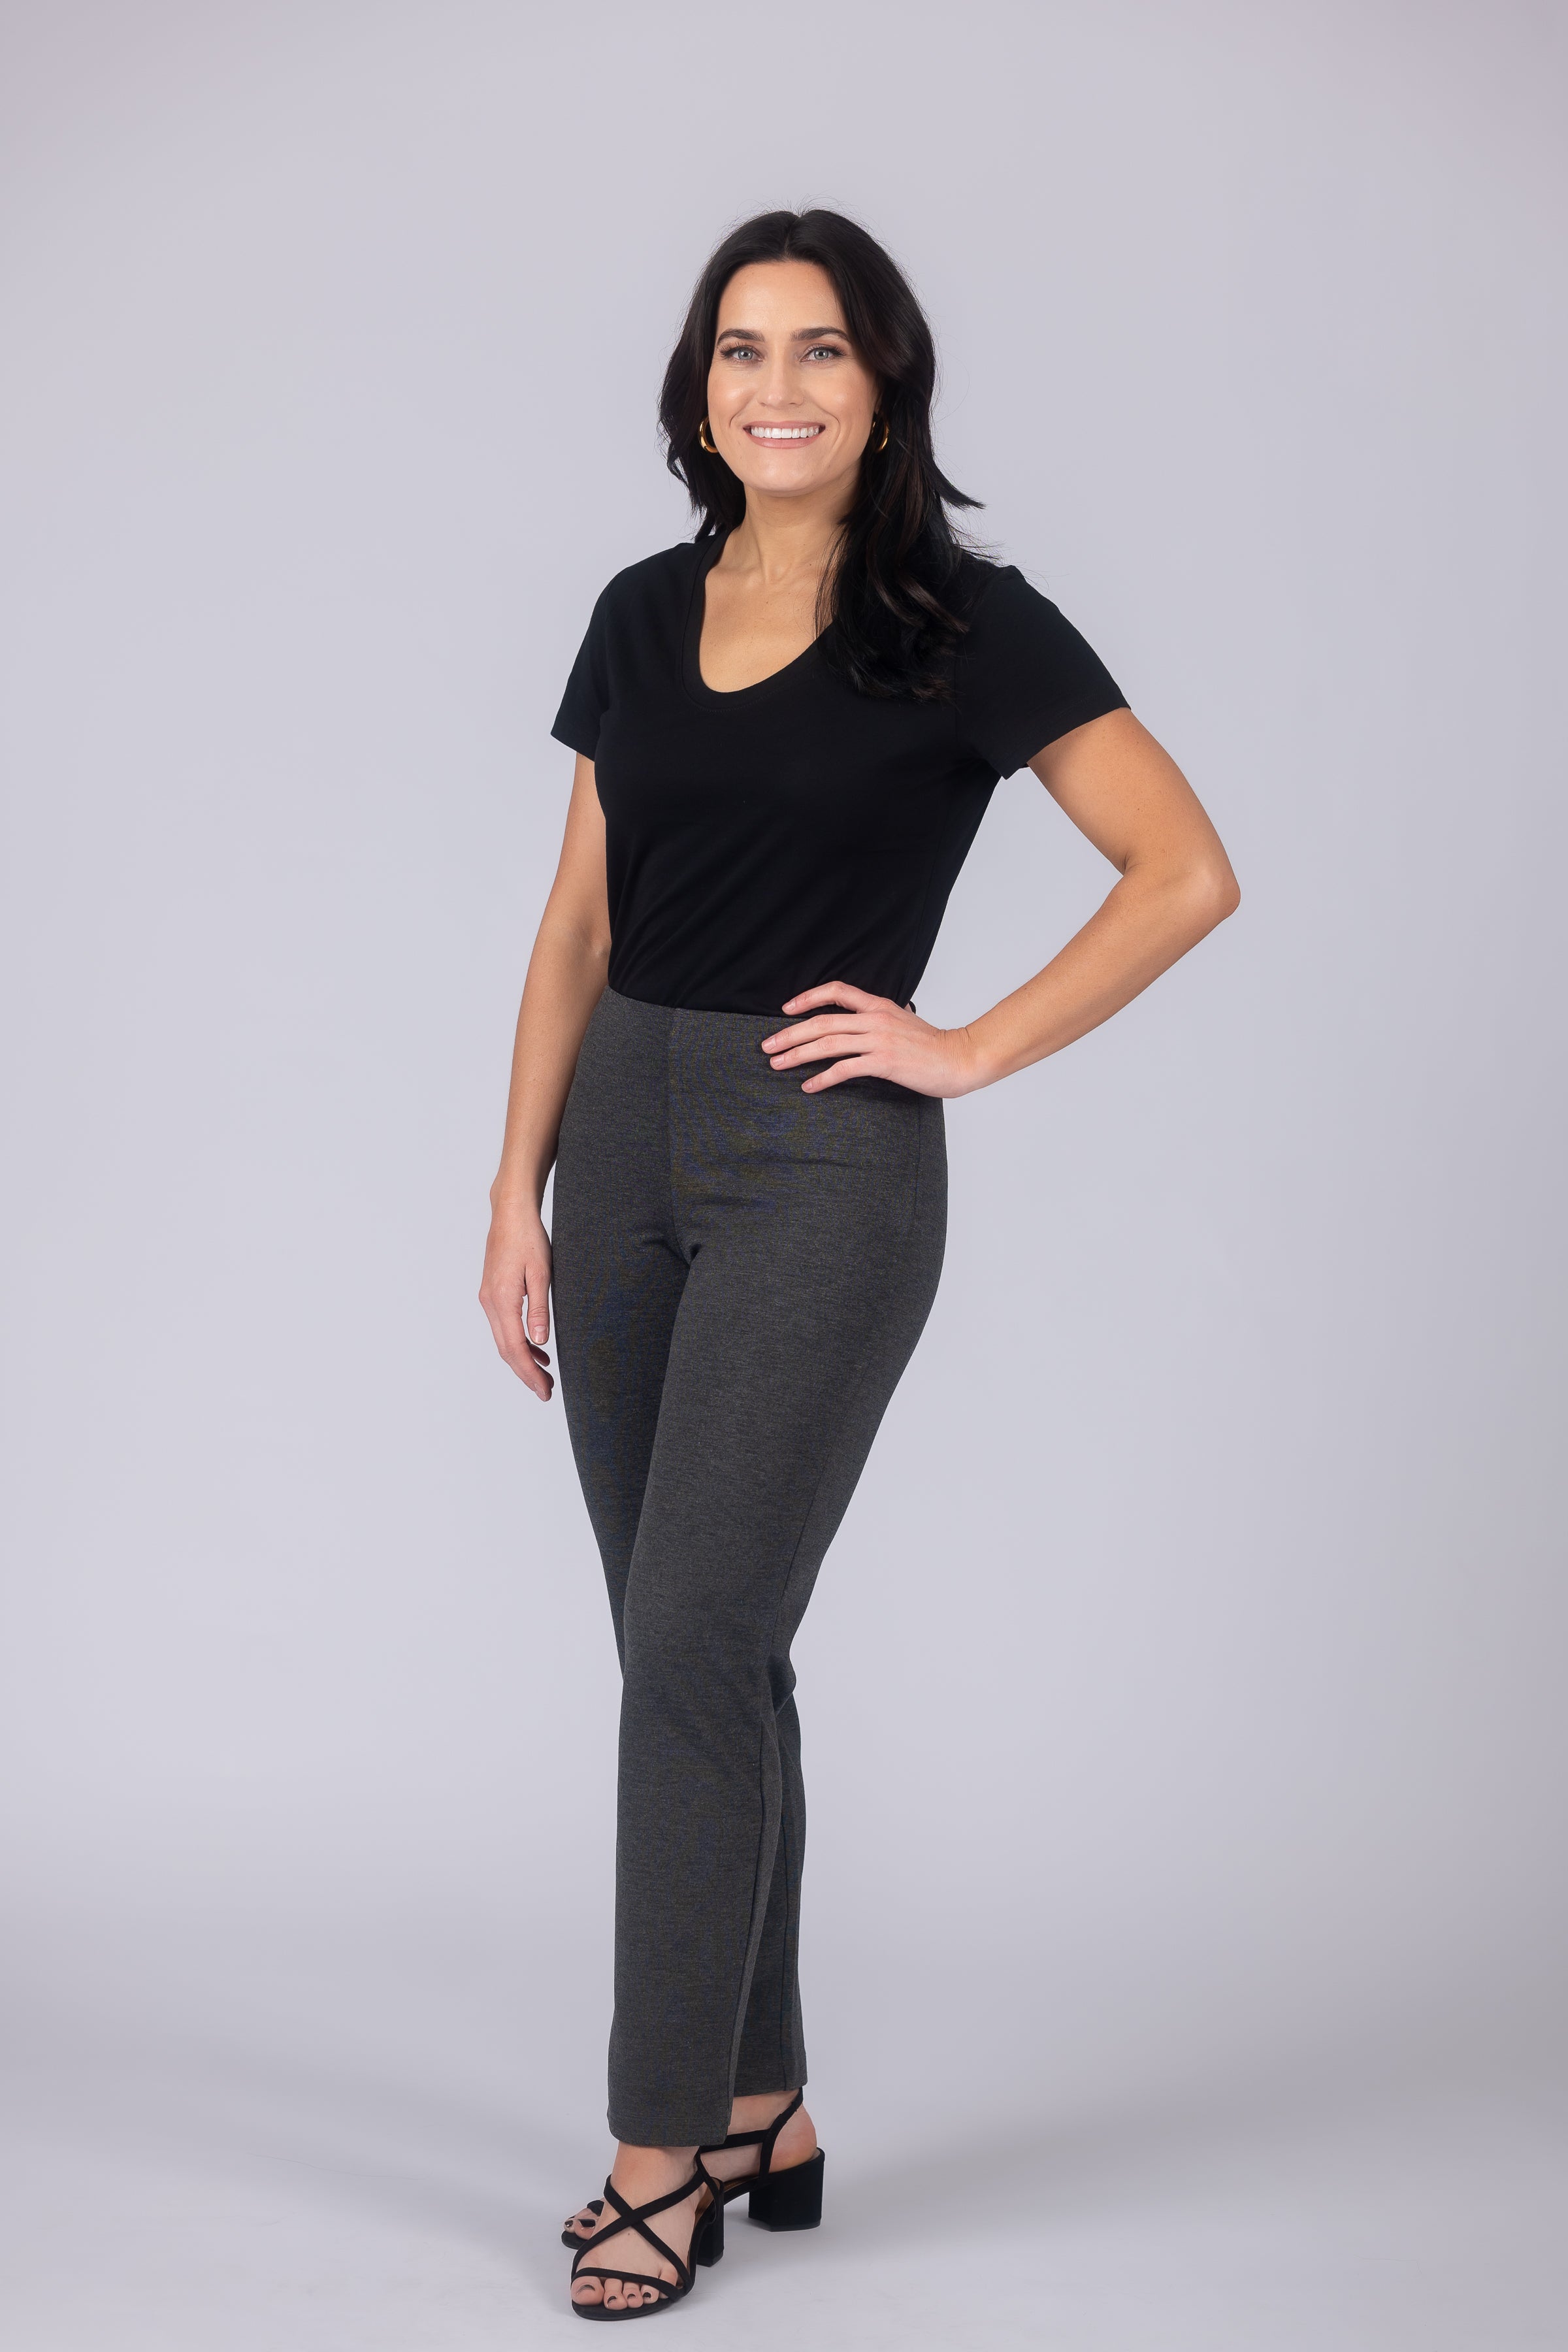 Express | Super High Waisted Supersoft Double Knit Skinny Pant in Pitch  Black | Express Style Trial